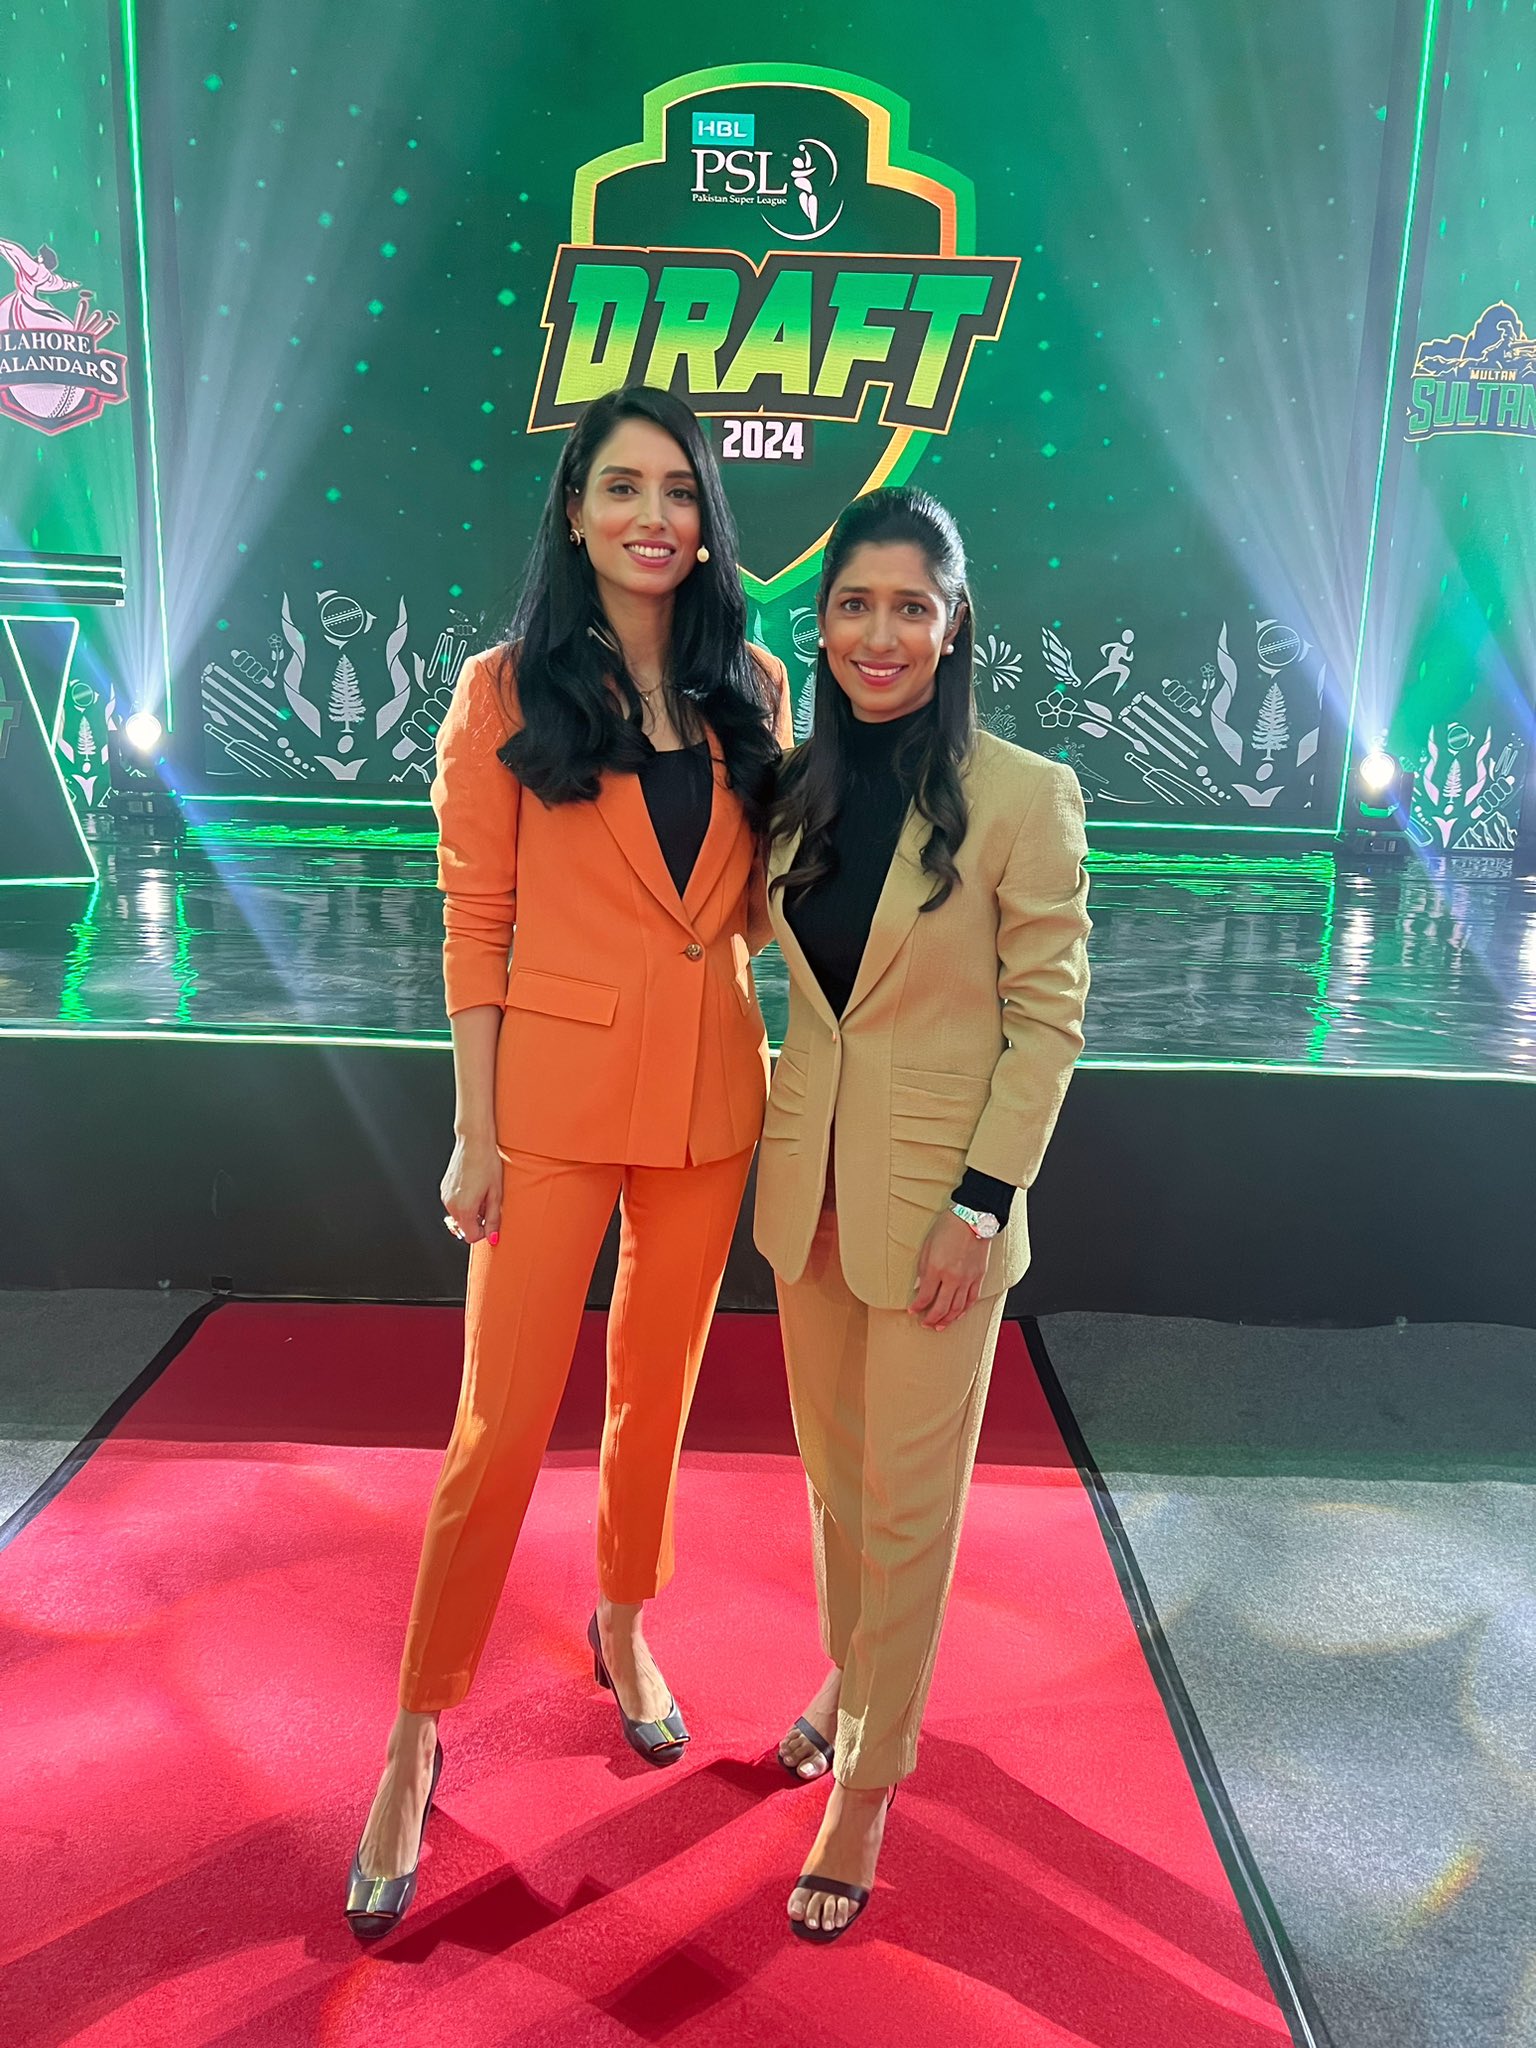 zainab abbas on X: "..it's a wrap from hosting the HBLPSL draft - the teams  are looking good on paper, should be an exciting HBLPSL season ahead!  https://t.co/DZW3Yx8Dro" / X